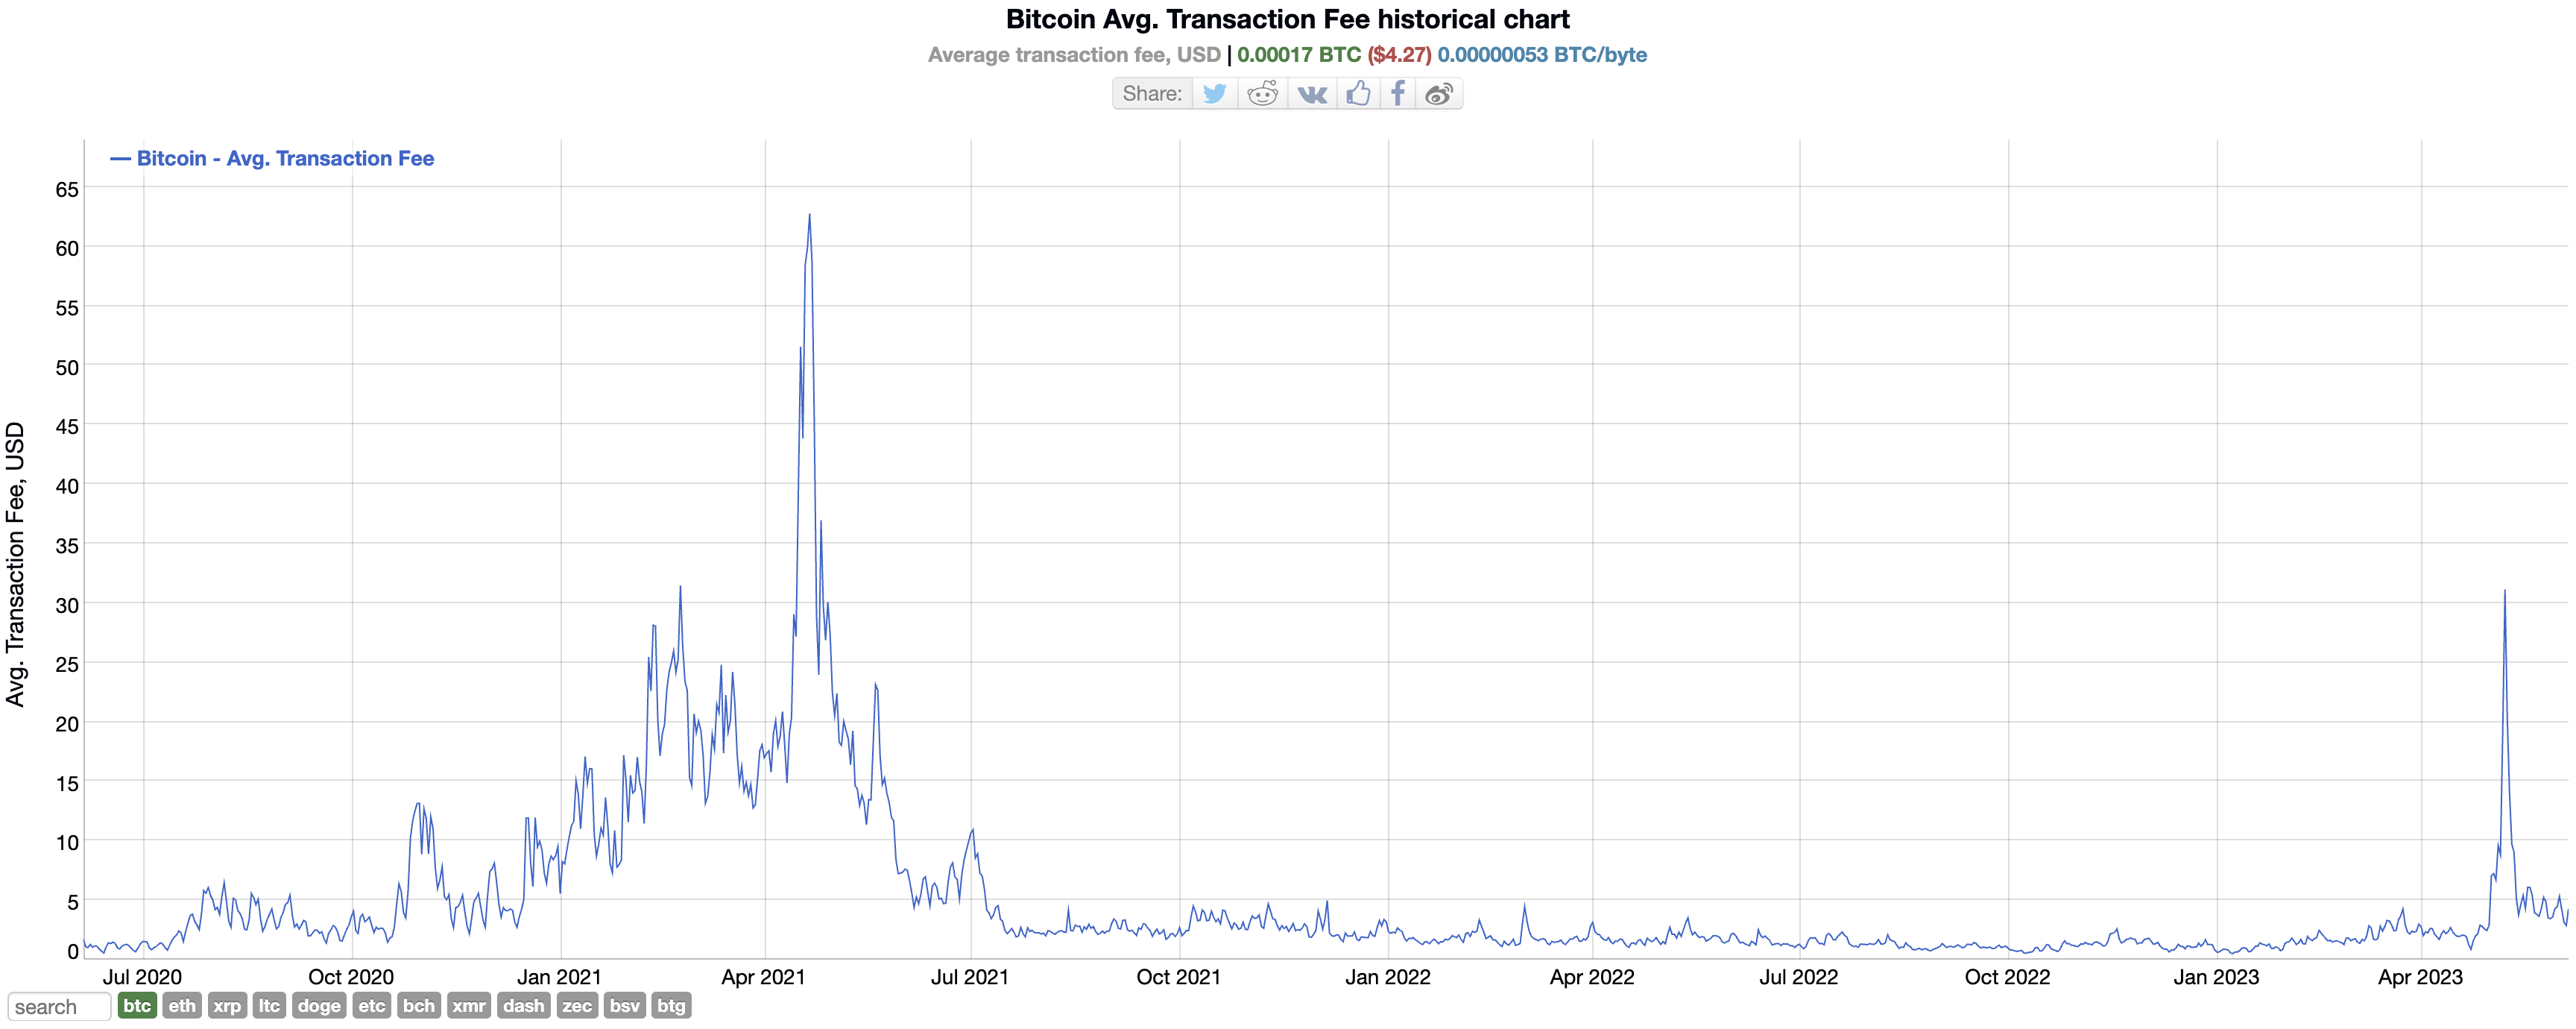 A Historical Chart of Bitcoin’s Average Transaction Fee